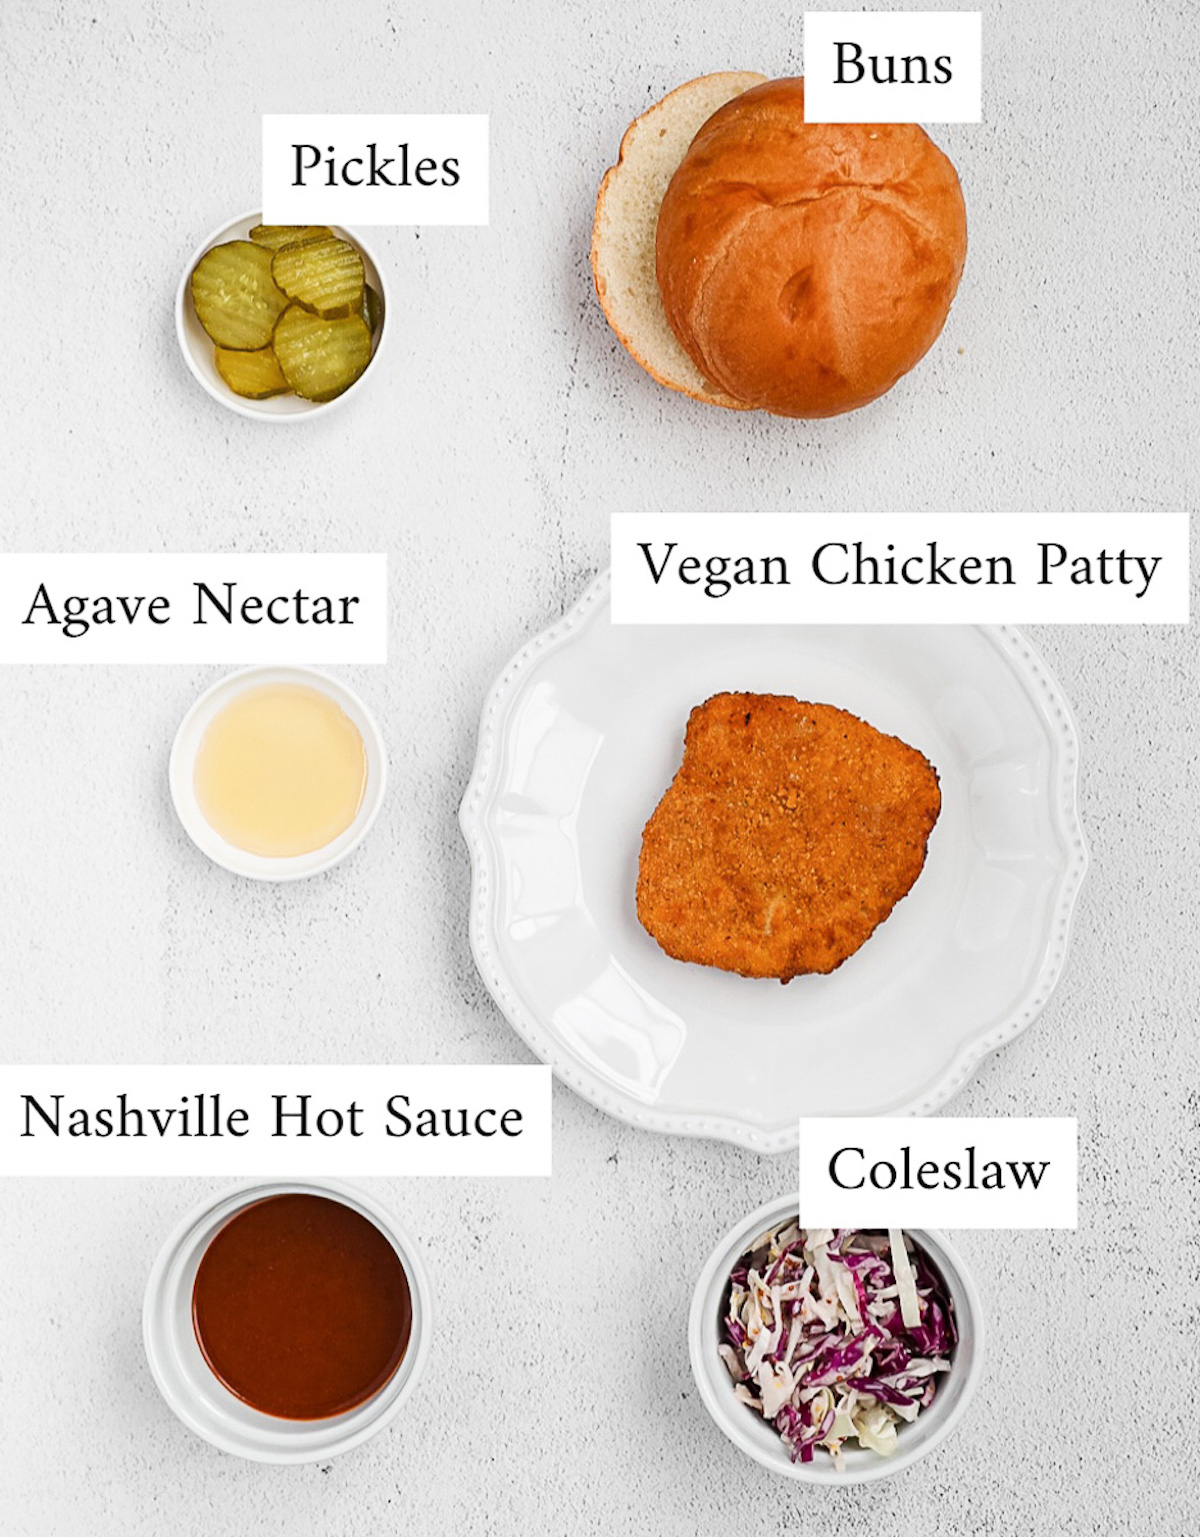 Labeled ingredients including: pickles, buns, agave nectar, a vegan chicken patty, hot sauce, and coleslaw.